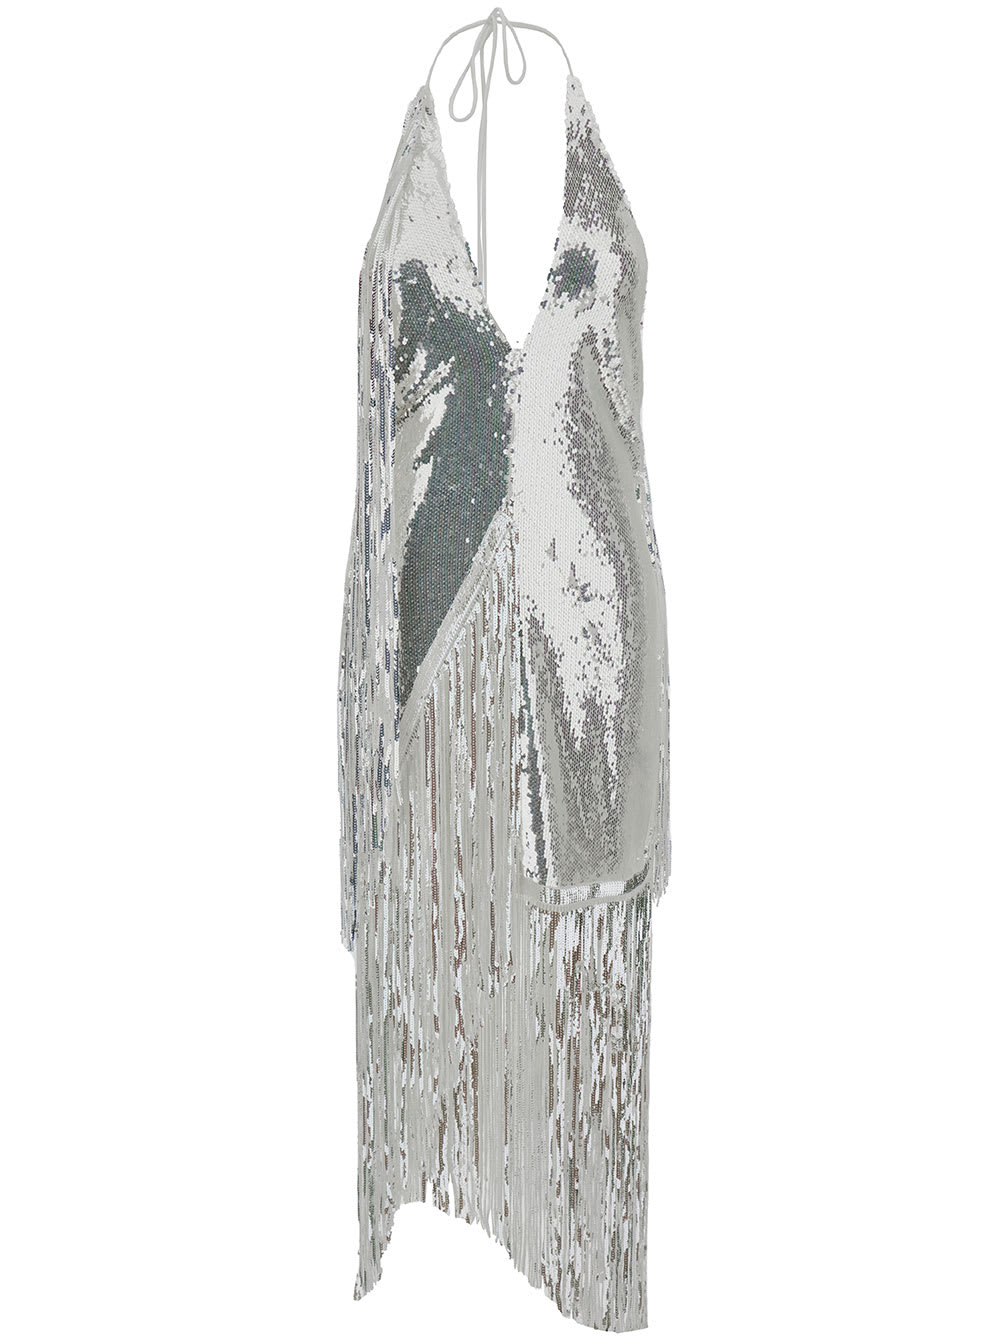 ROTATE BIRGER CHRISTENSEN MIDI SILVER DRESS WITH FRINGES AND PAILLETTES IN STRETCH FABRIC WOMAN